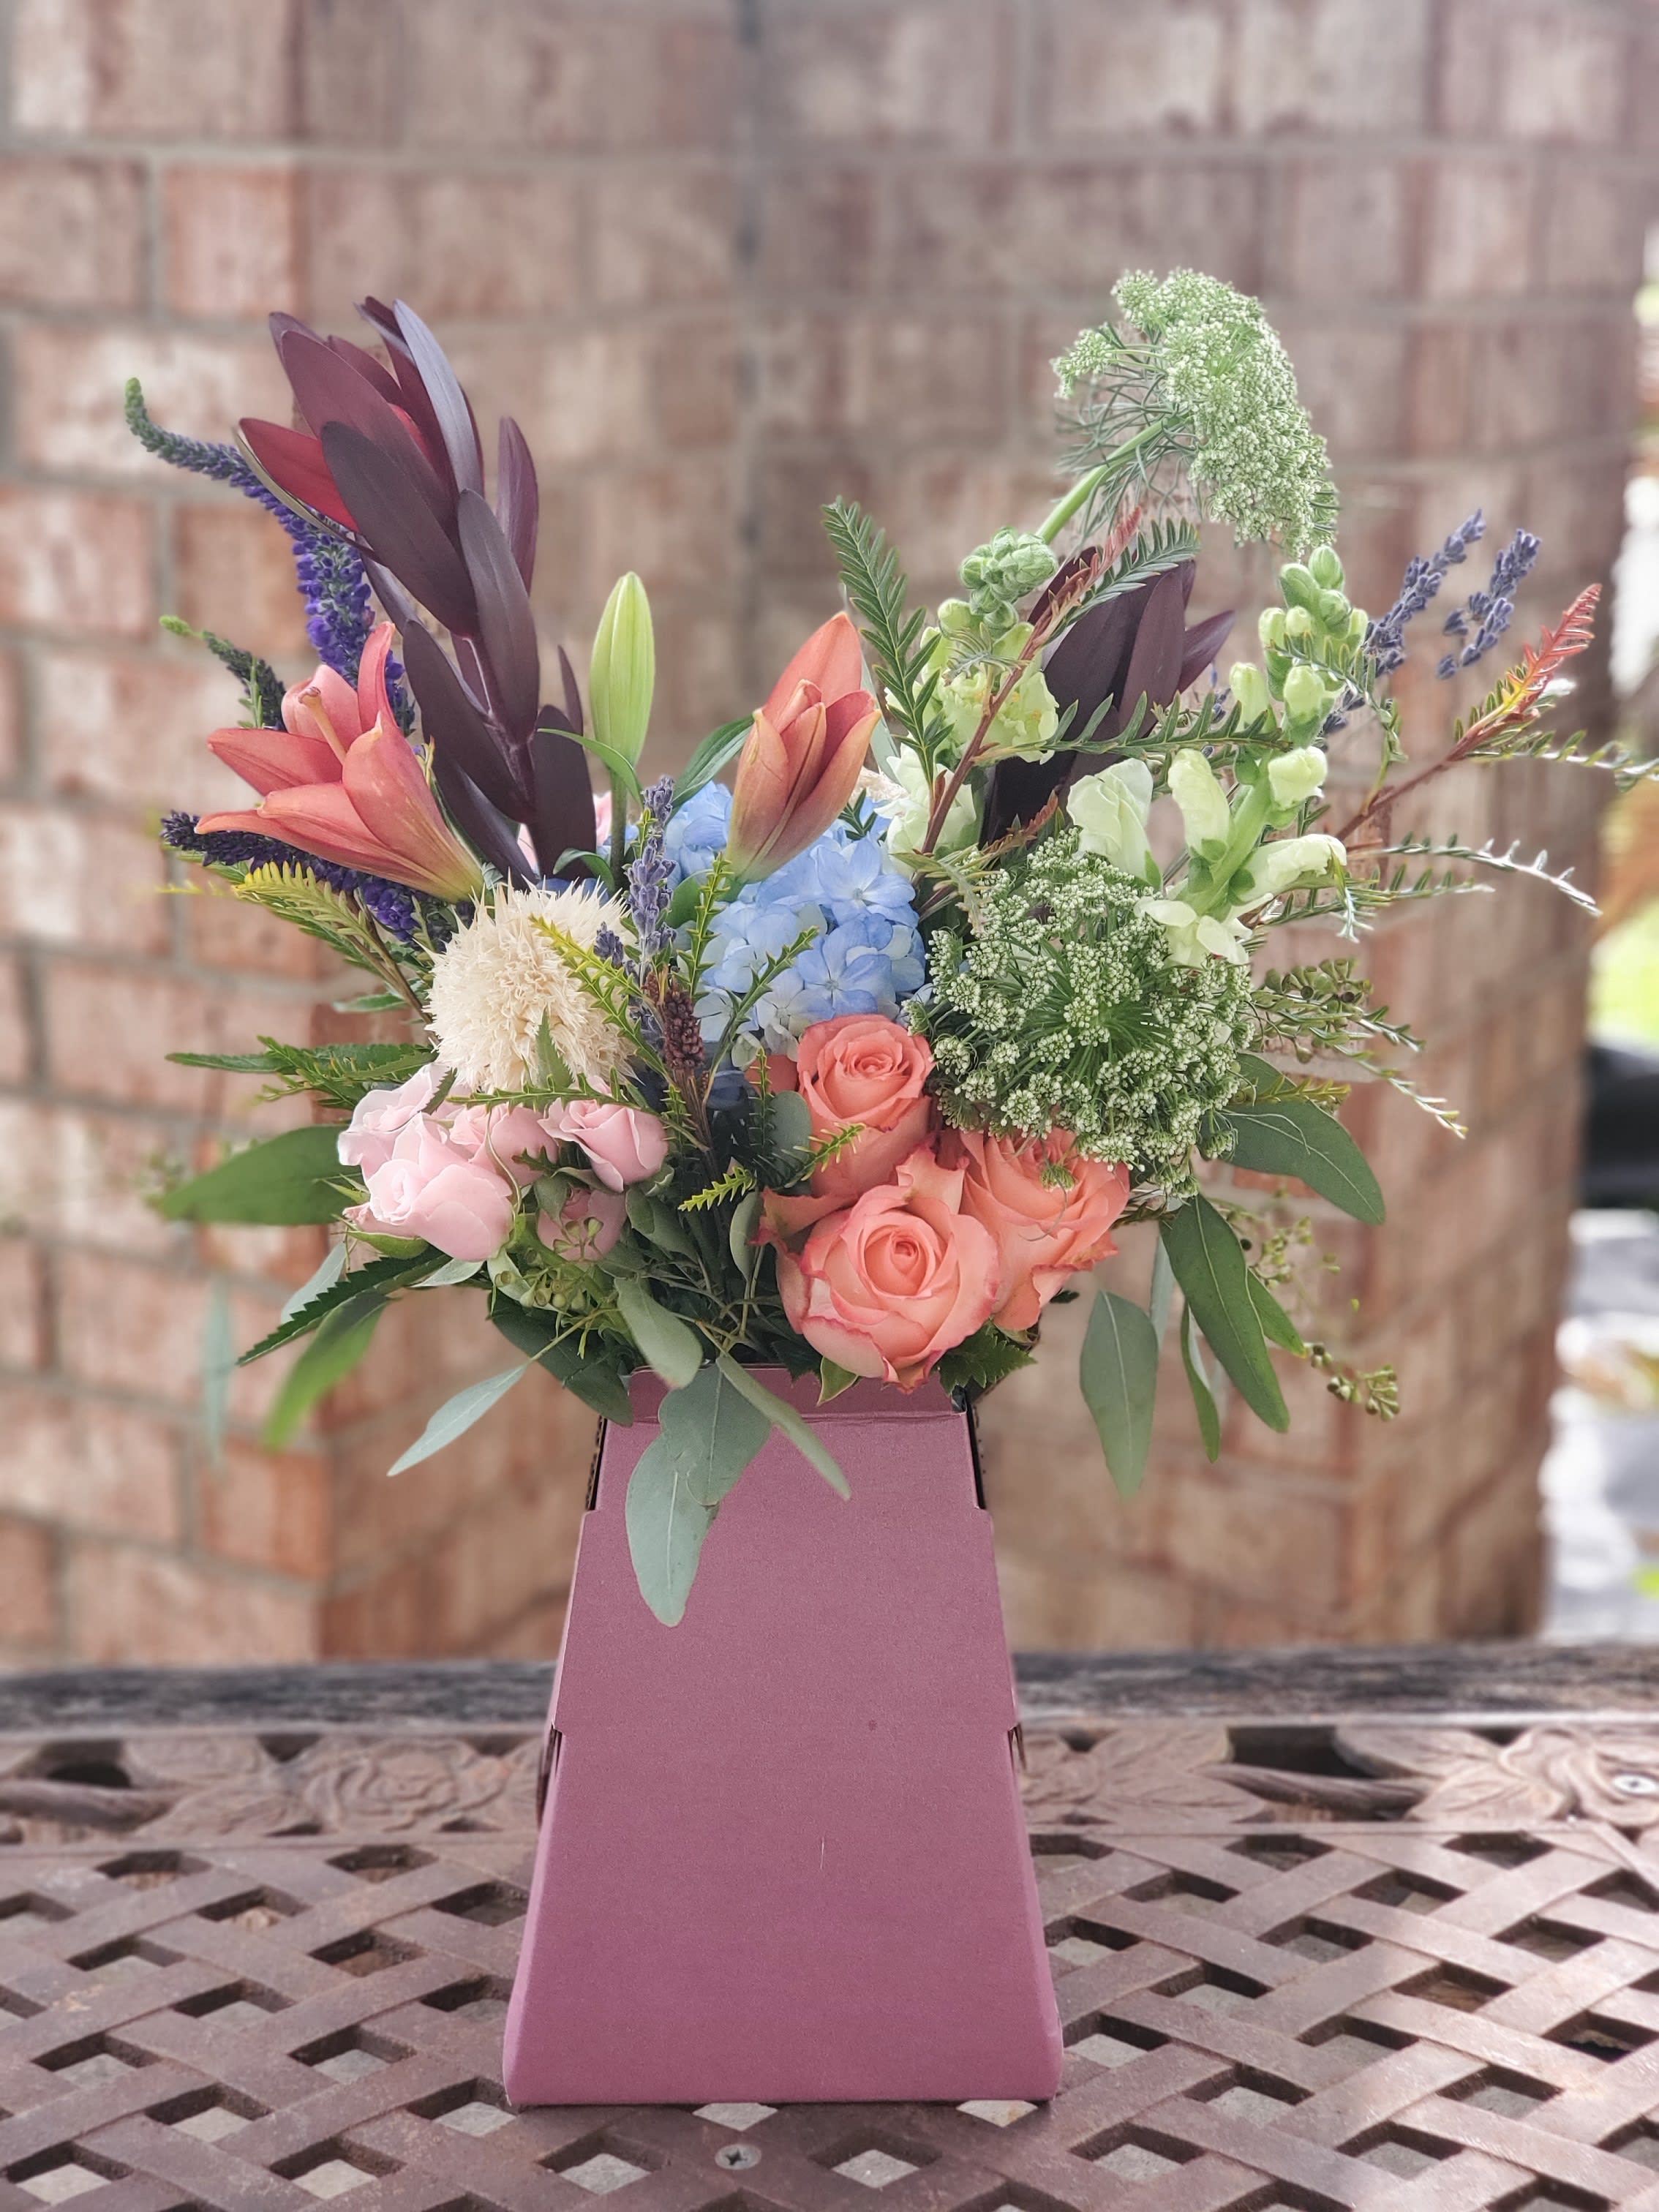 Just Say Yes - Inspired by modern style and wedding bouquets, this arrangement uses rustic colors of roses, stock, and larkspur in a recyclable cardboard vase.